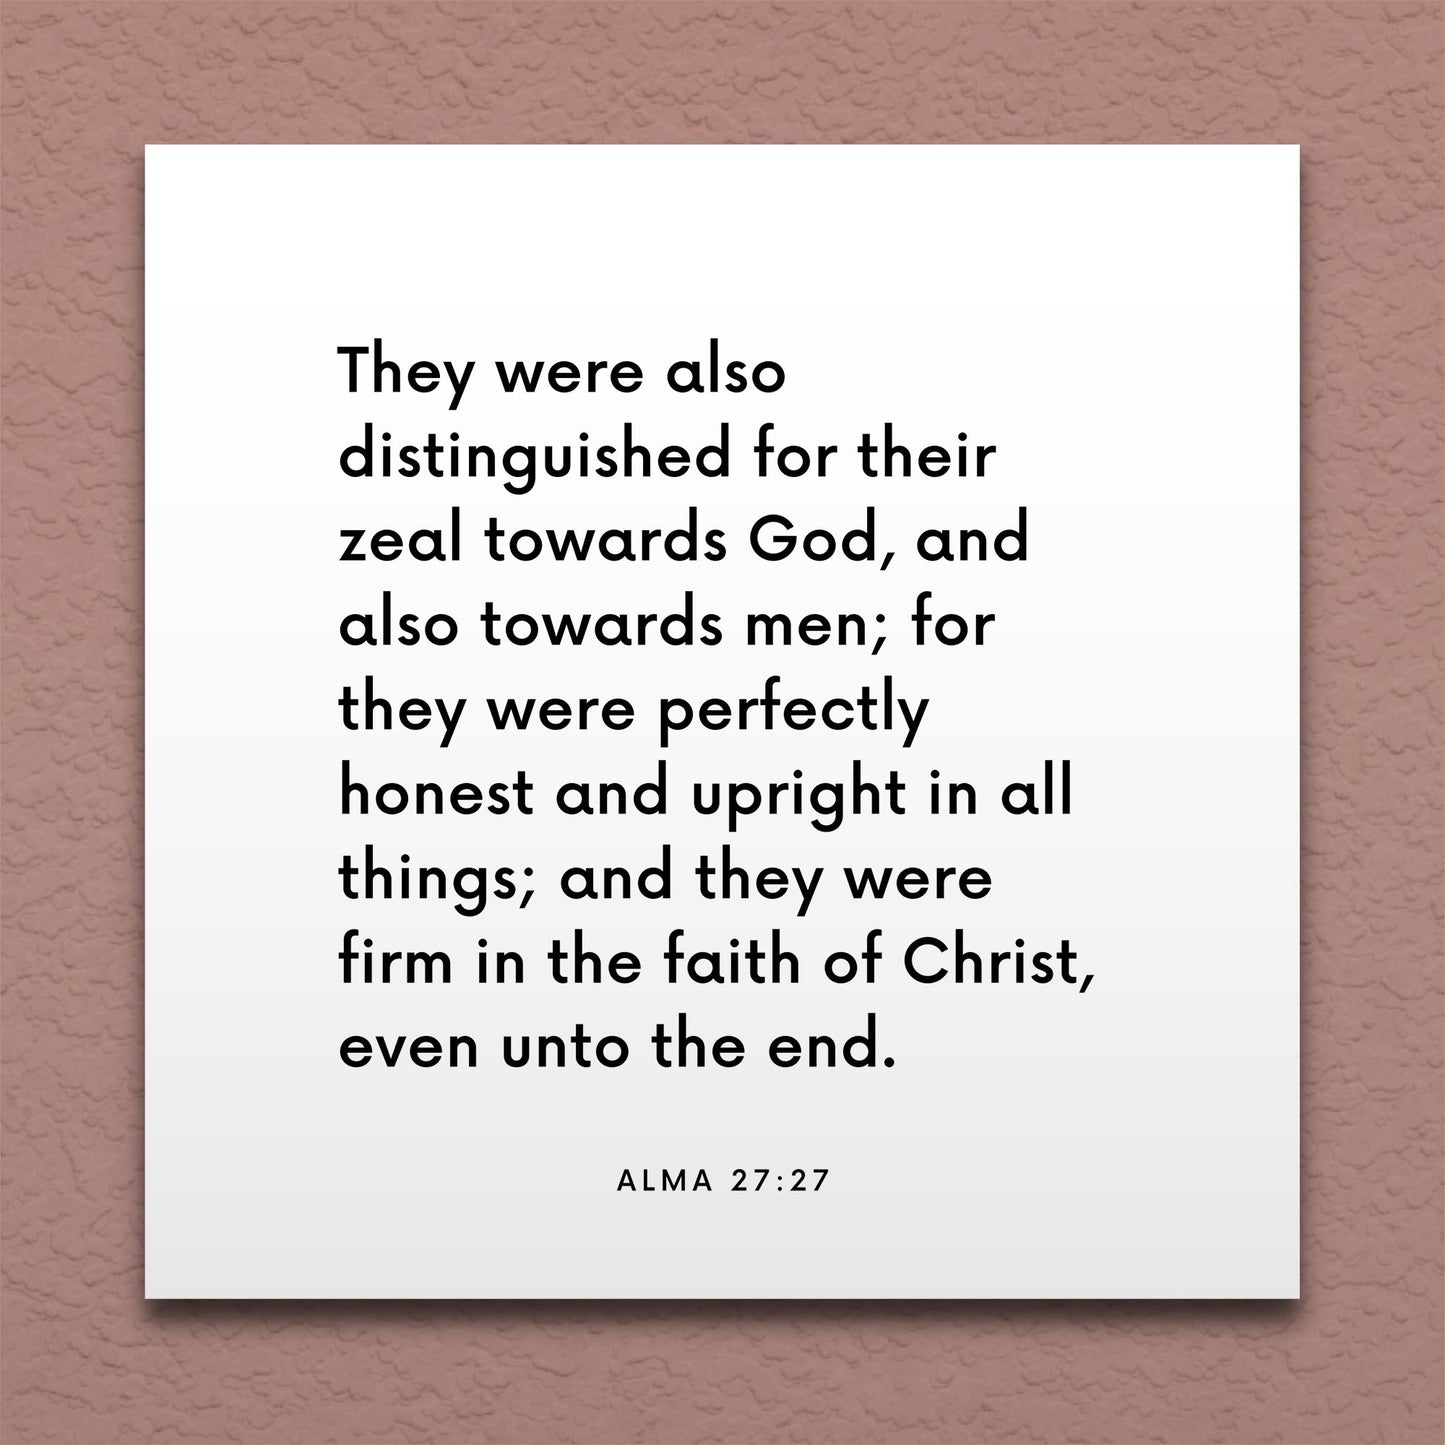 Wall-mounted scripture tile for Alma 27:27 - "They were perfectly honest and upright in all things"